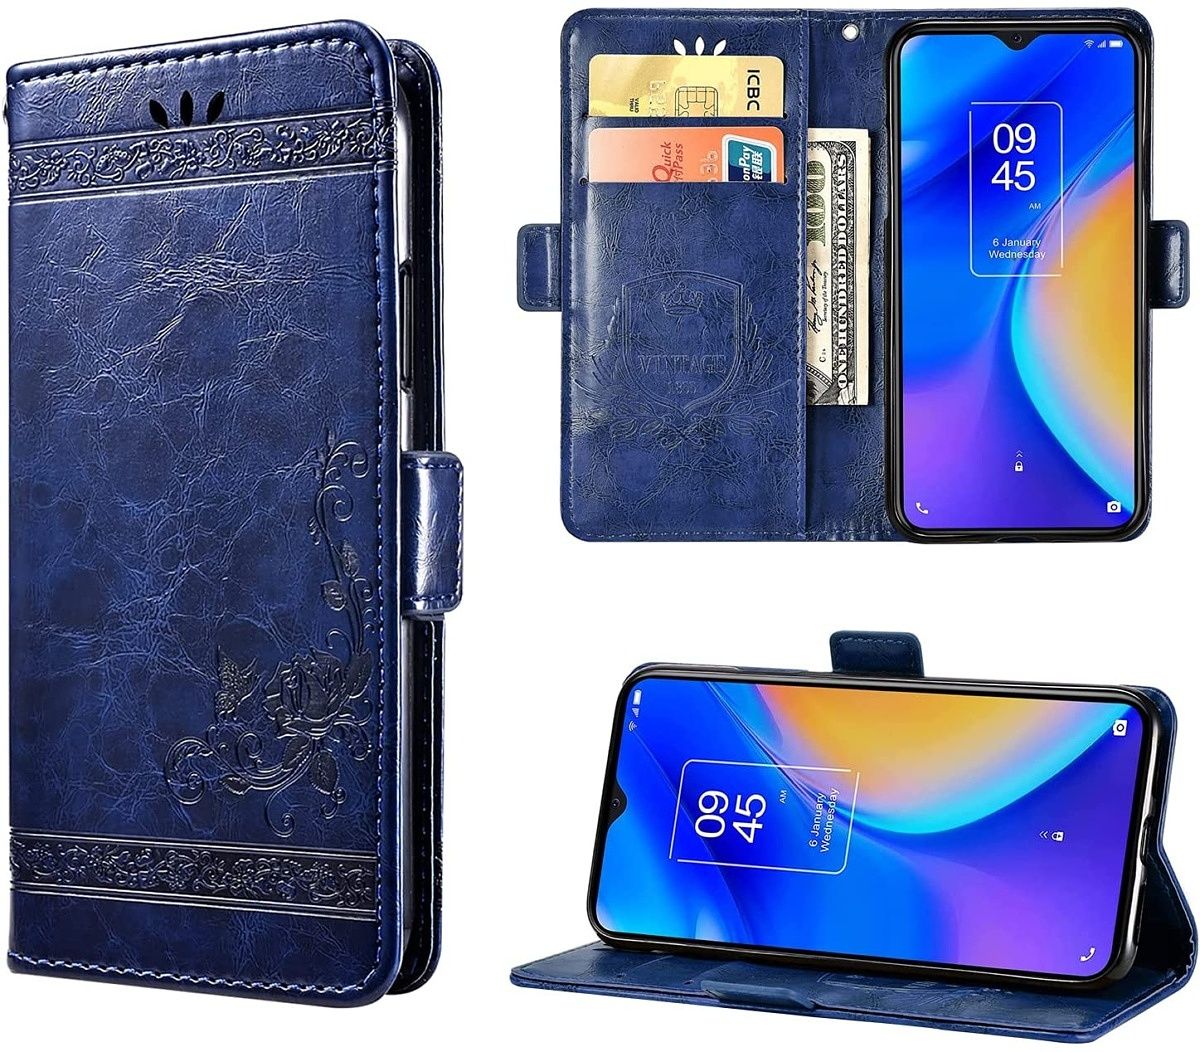 This CaKoo case is a decent option if you’re looking for a wallet case for your 20 SE. It uses a PU leather exterior and a TPU interior to protect the smartphone. There are two card slots and one cash slot in the case to keep your belongings. In addition, you can fold the case for use as a kickstand.